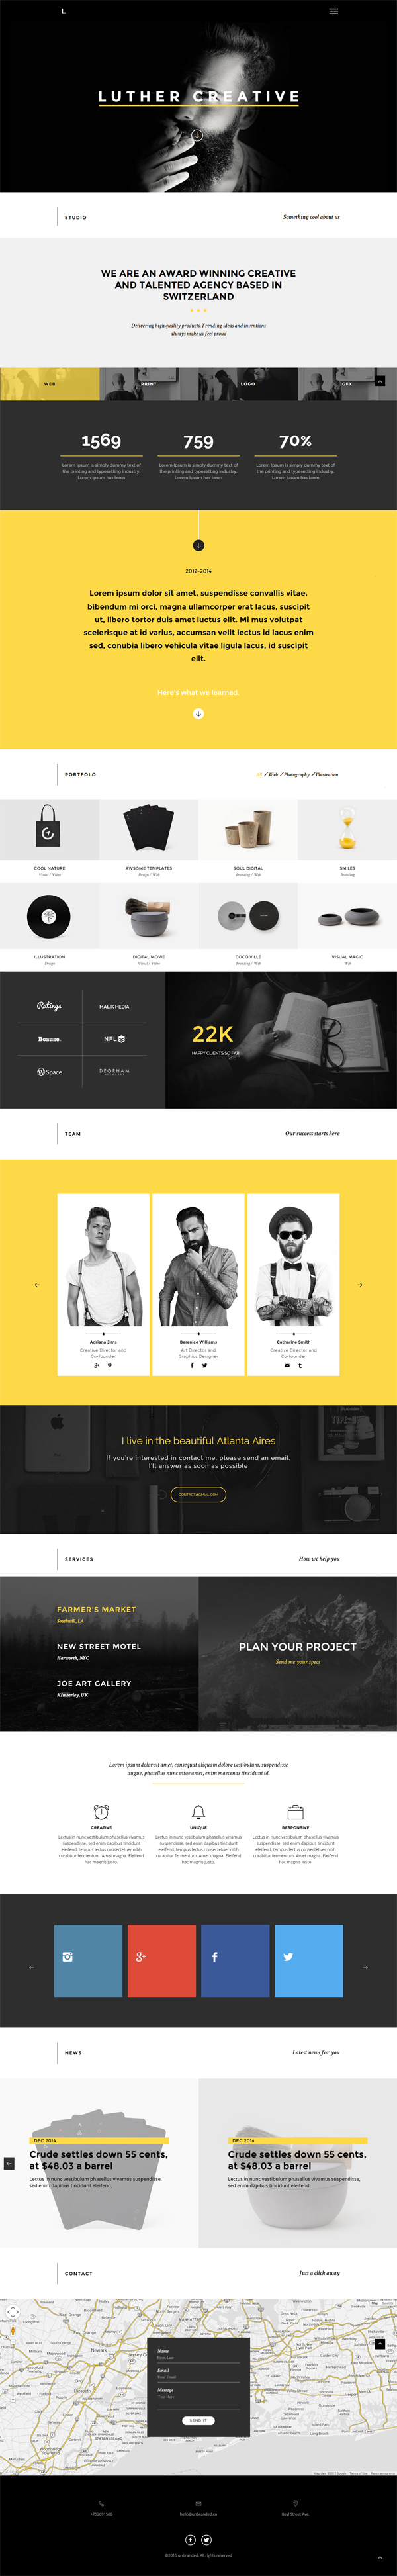 Luther - Unique & Creative One Page HTML5 Template